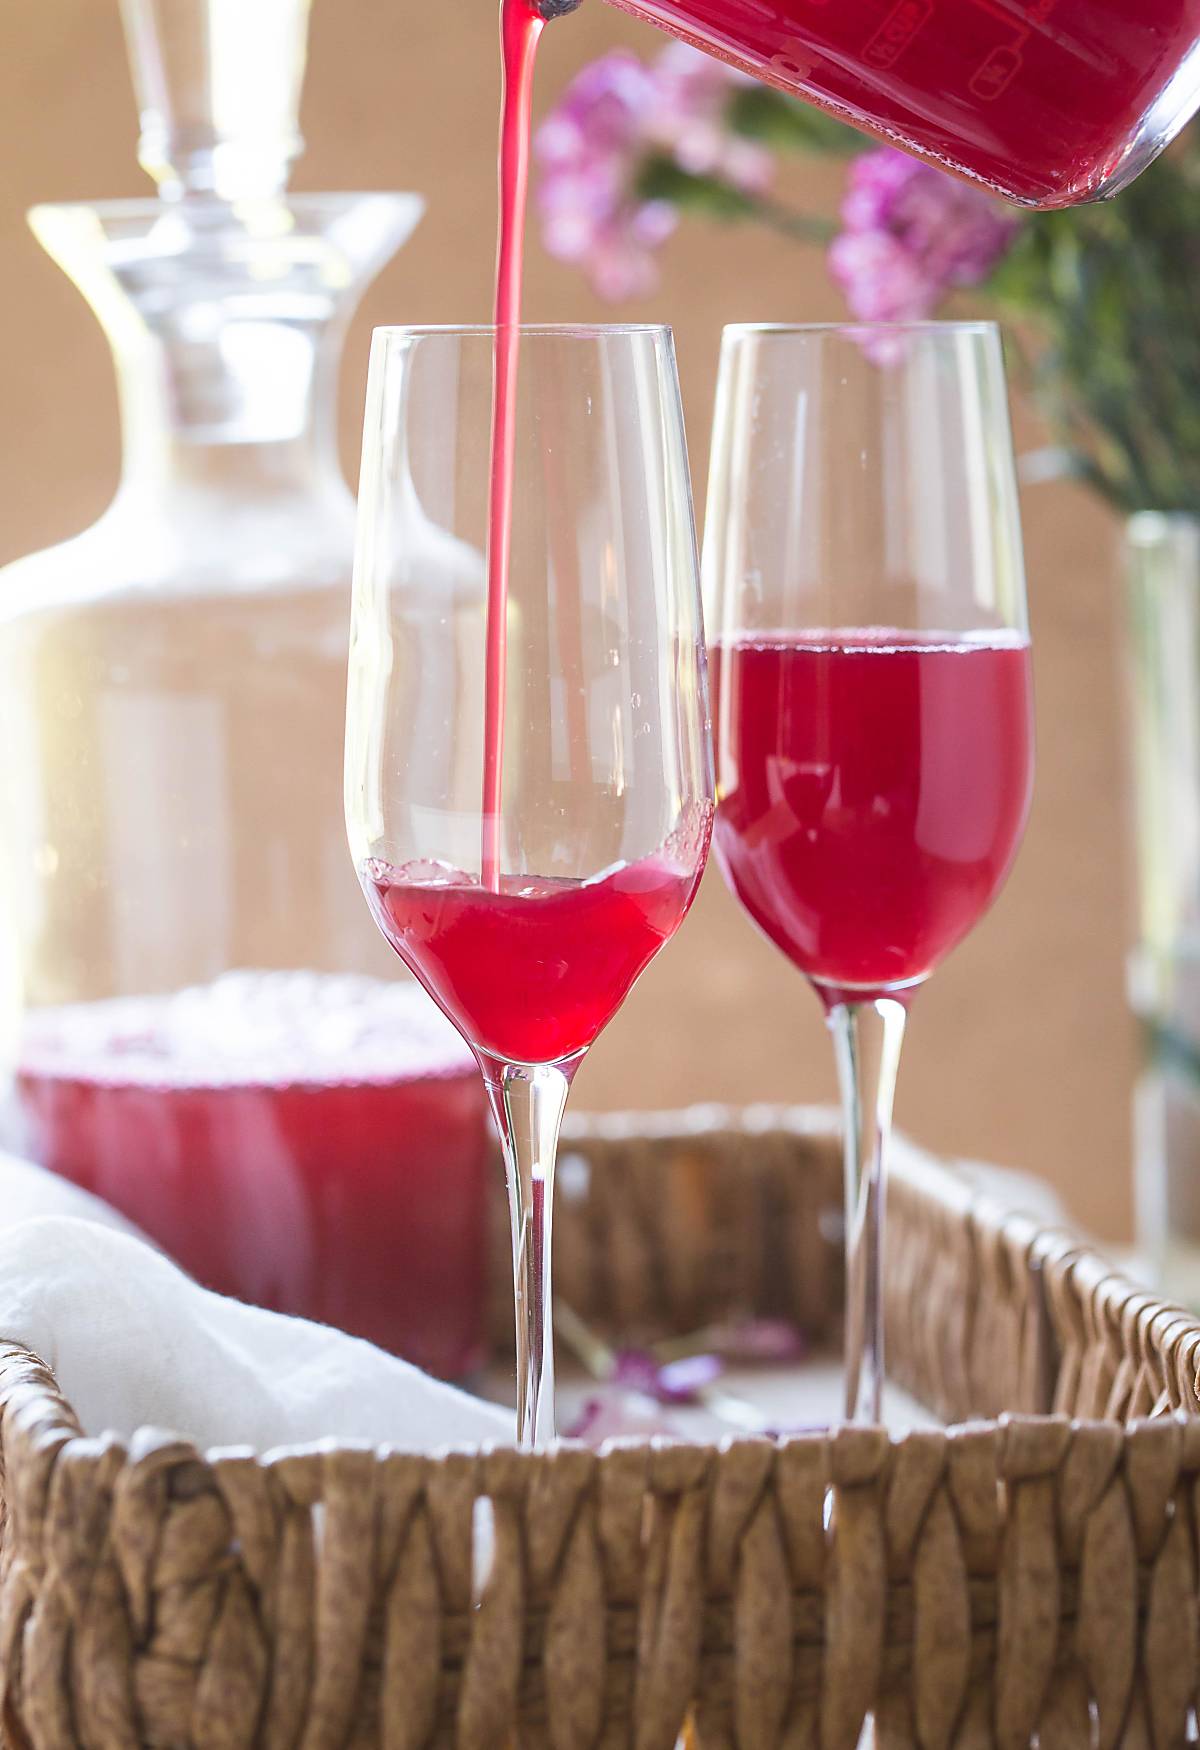 Image with fresh Cranberry drink while pouring in champagne flute.